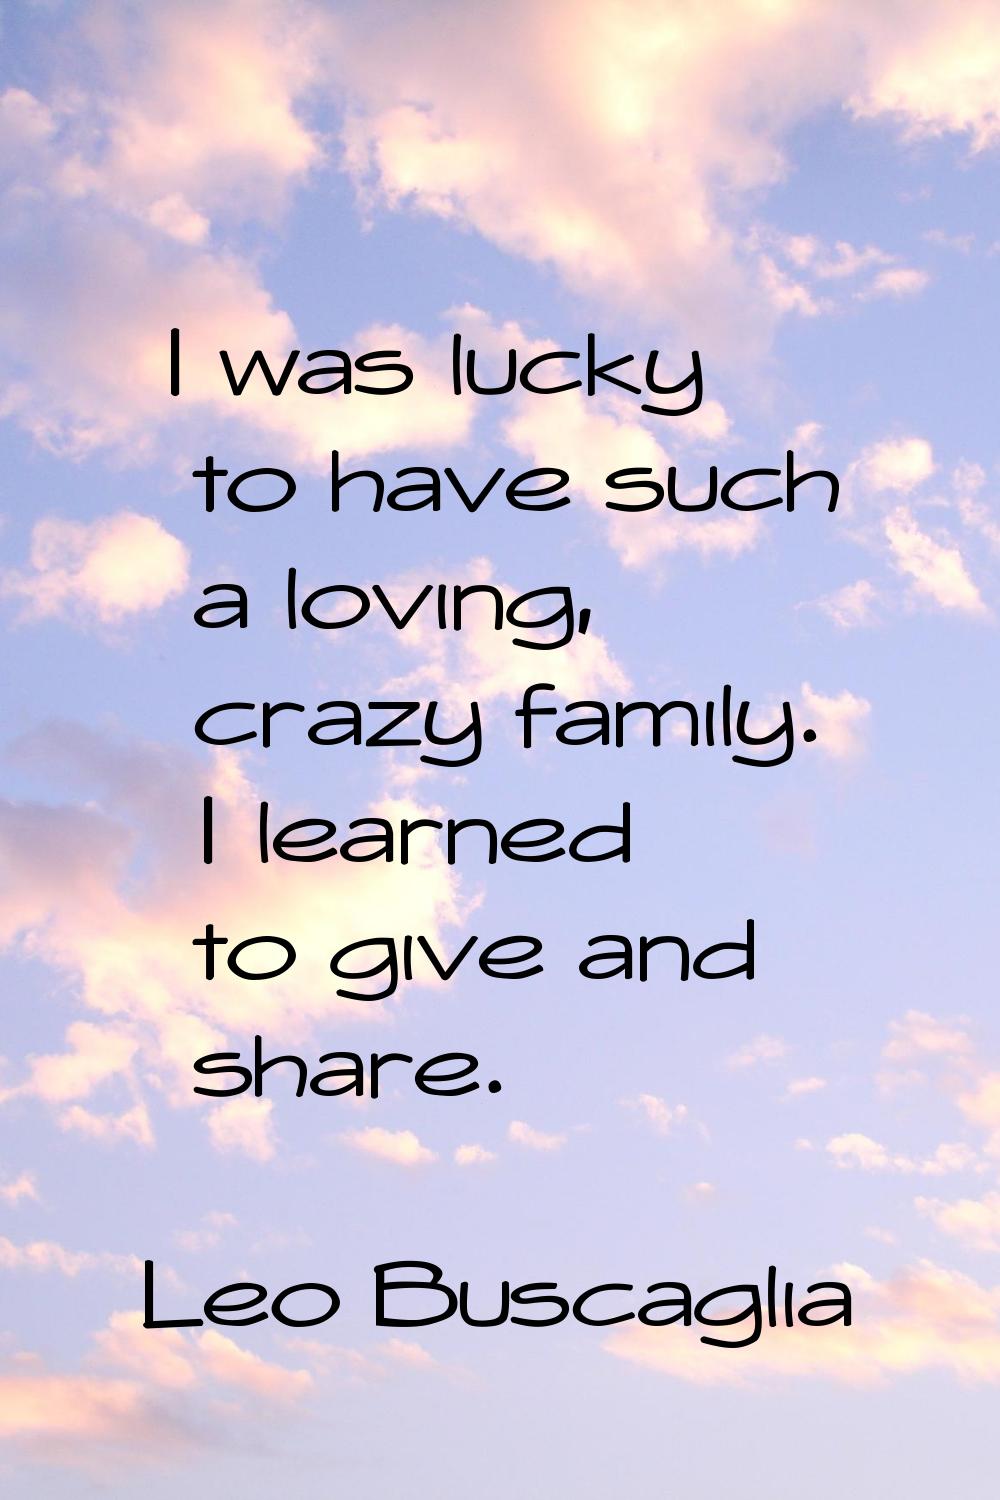 I was lucky to have such a loving, crazy family. I learned to give and share.